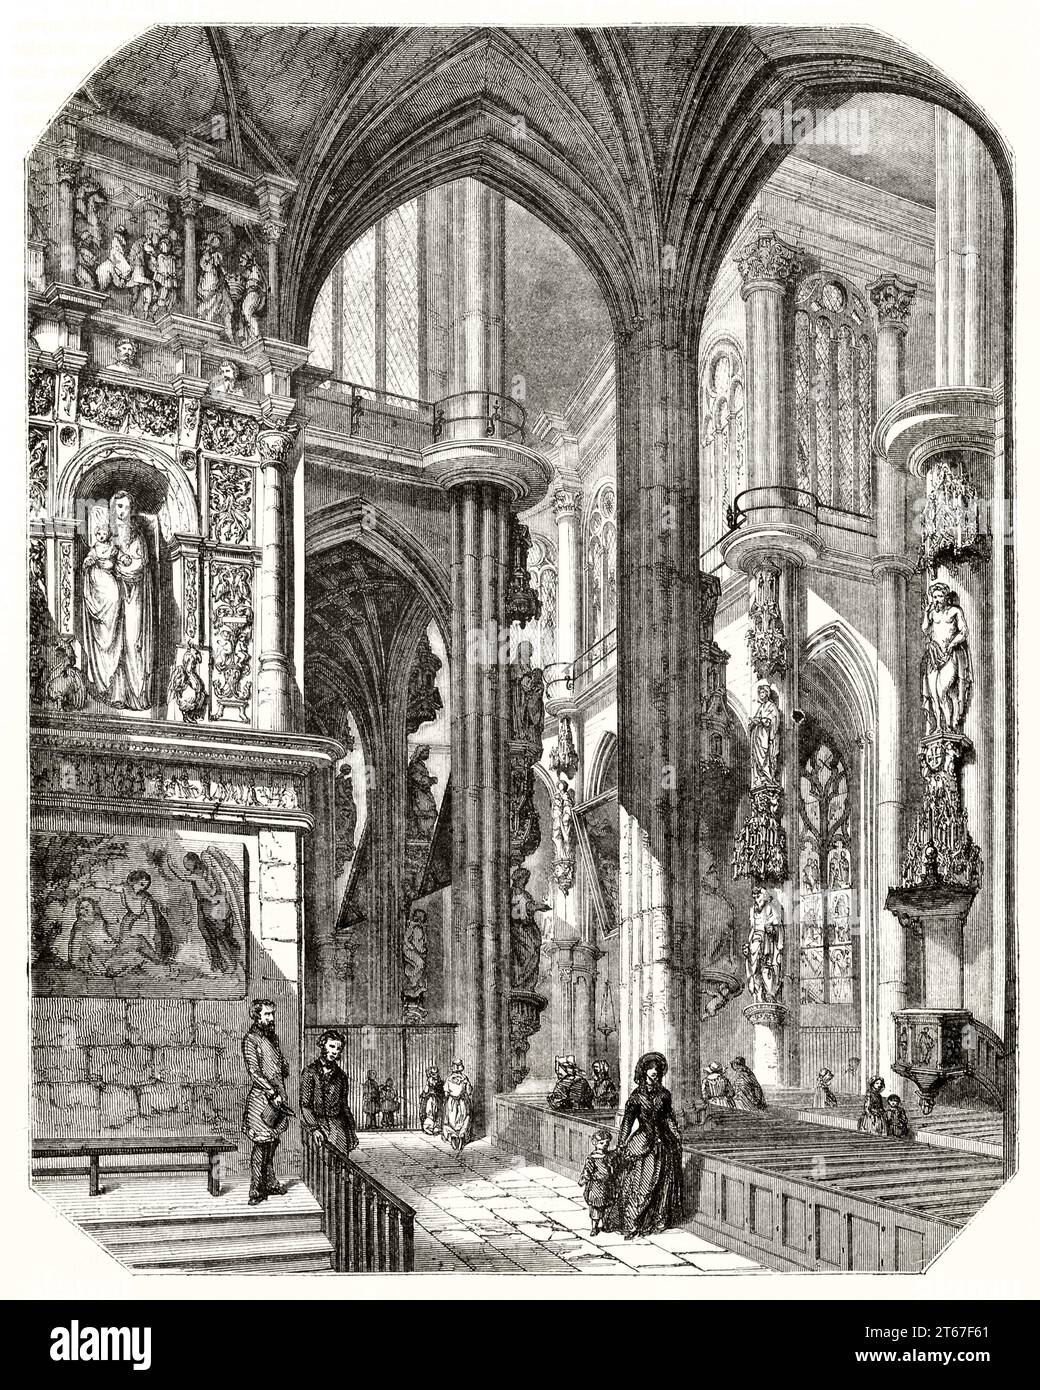 Old internal view of Saint-Pantaléon church, Troyes, France. By Lancelot, publ. on Magasin Pittoresque, Paris, 1851 Stock Photo